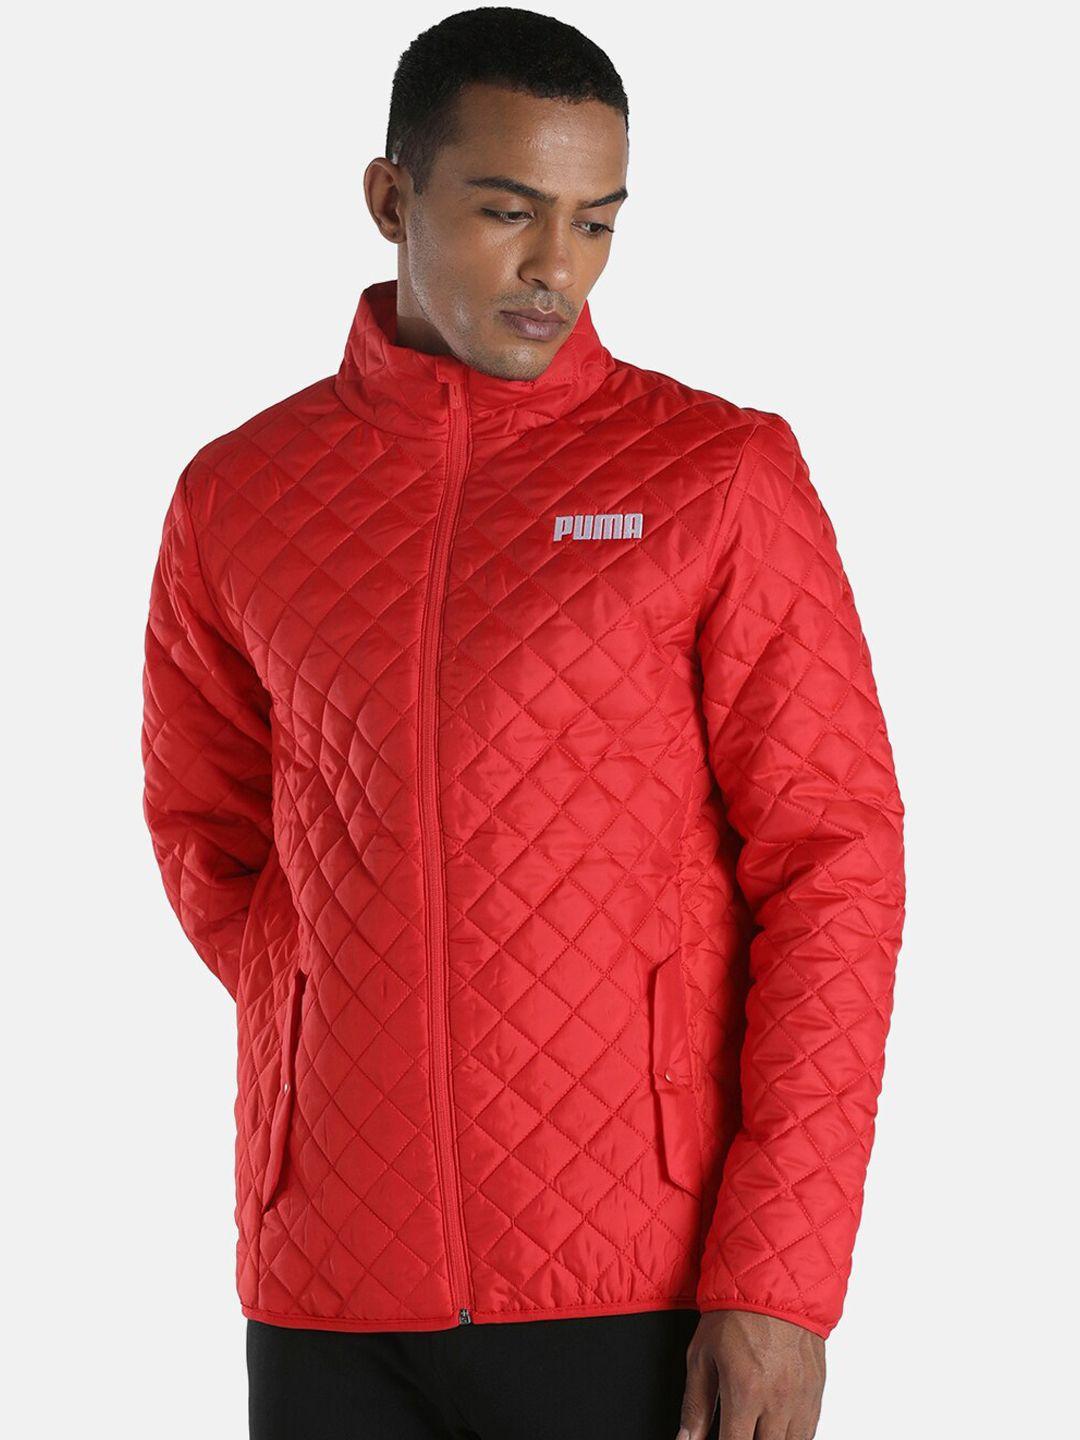 puma-men-red-quilted-jacket